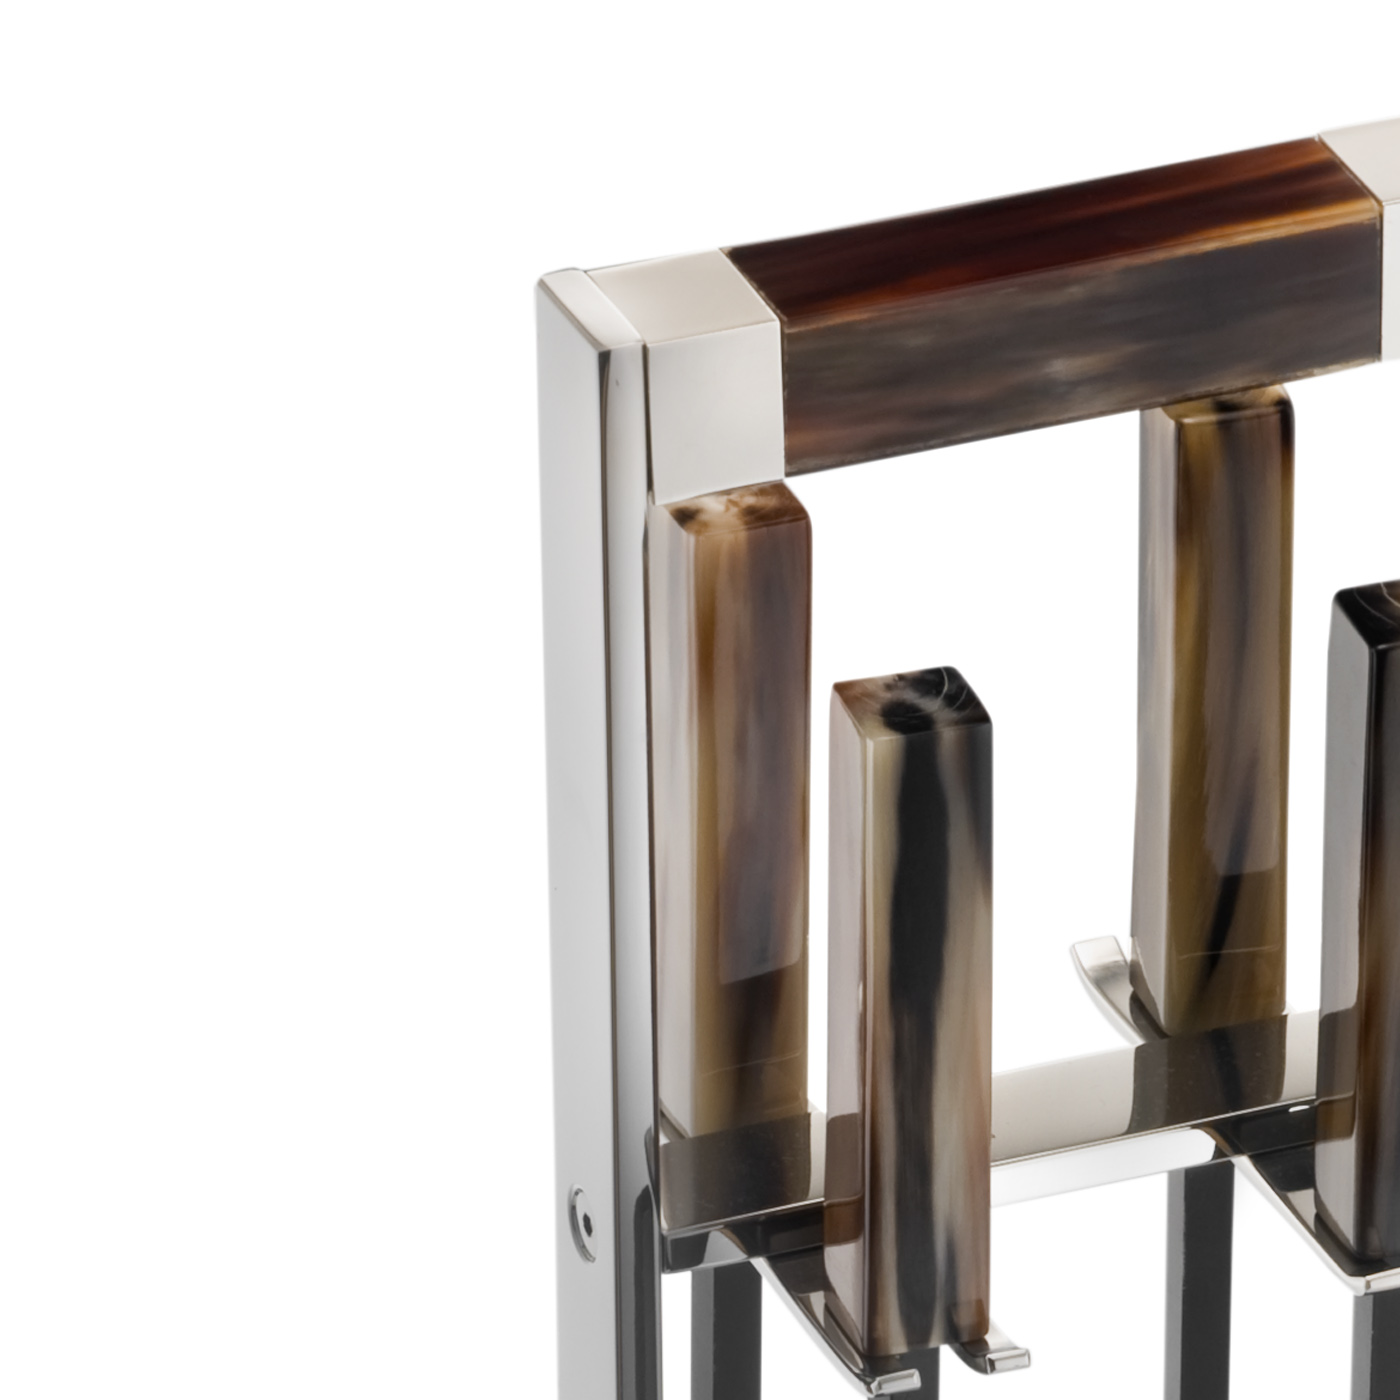 Coat stands and complementary furniture - Vesta fireplace set in horn and stainless steel - detail - Arcahorn